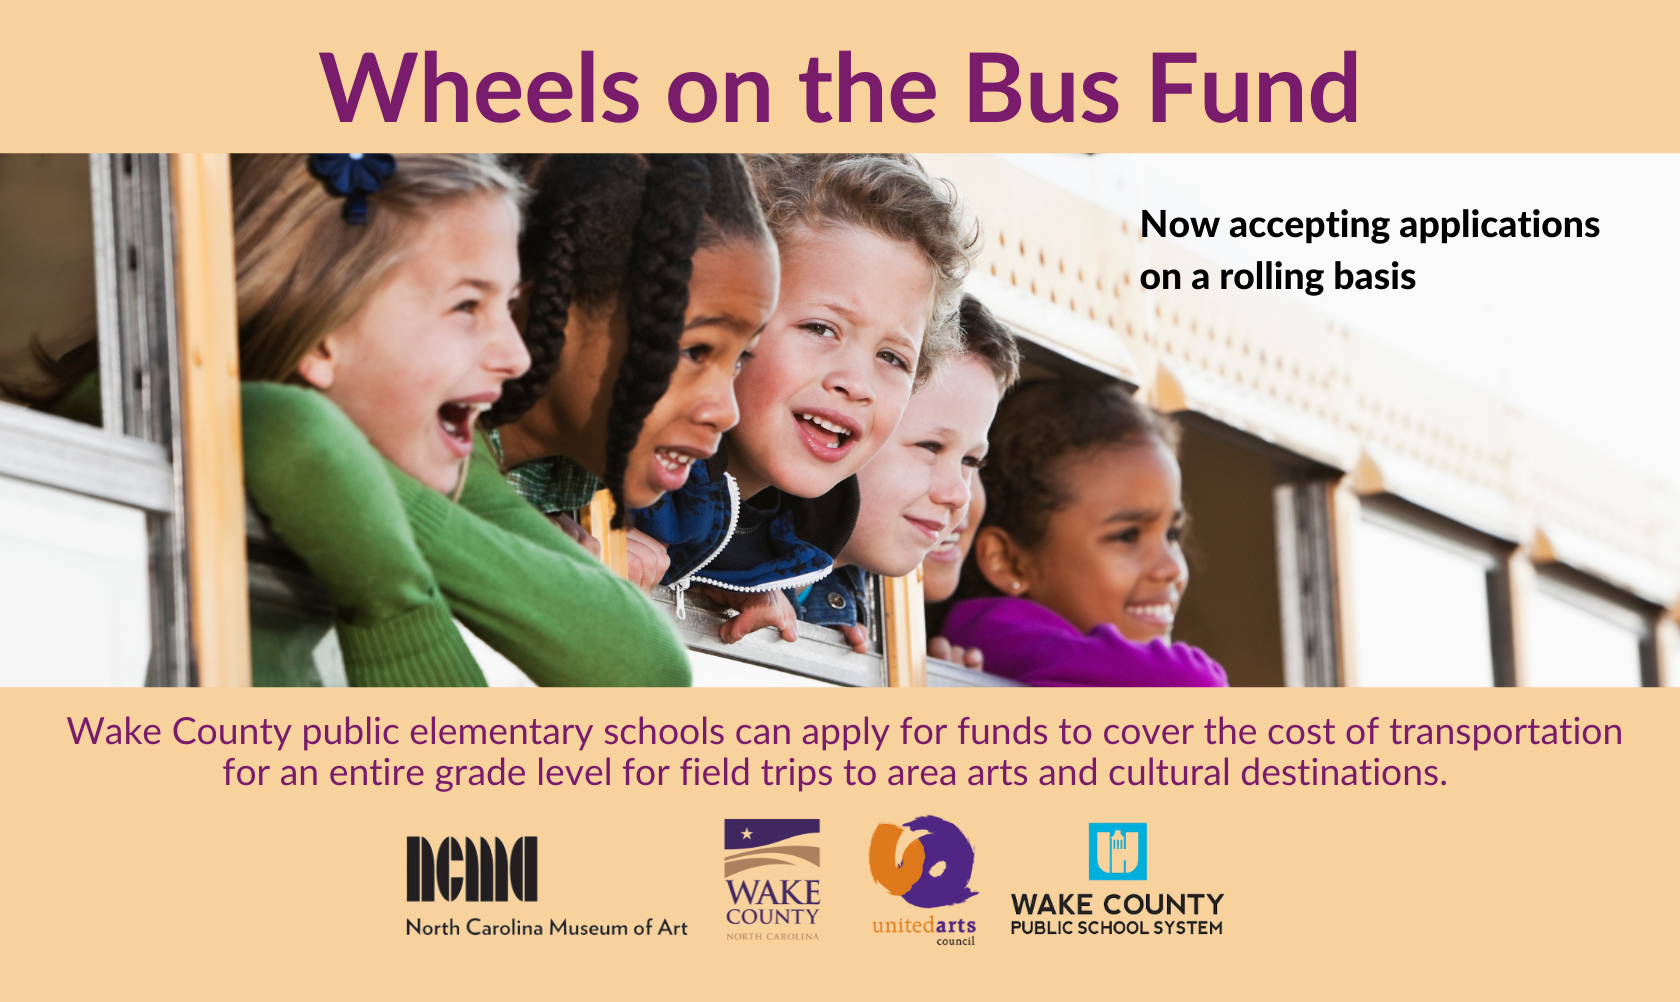 Wheels on the Bus Fund Wake County public elementary schools can apply for funds to cover the cost of transportation for an entire grade level for field trips to area arts and cultural destinations. Applications accepted on a rolling basis